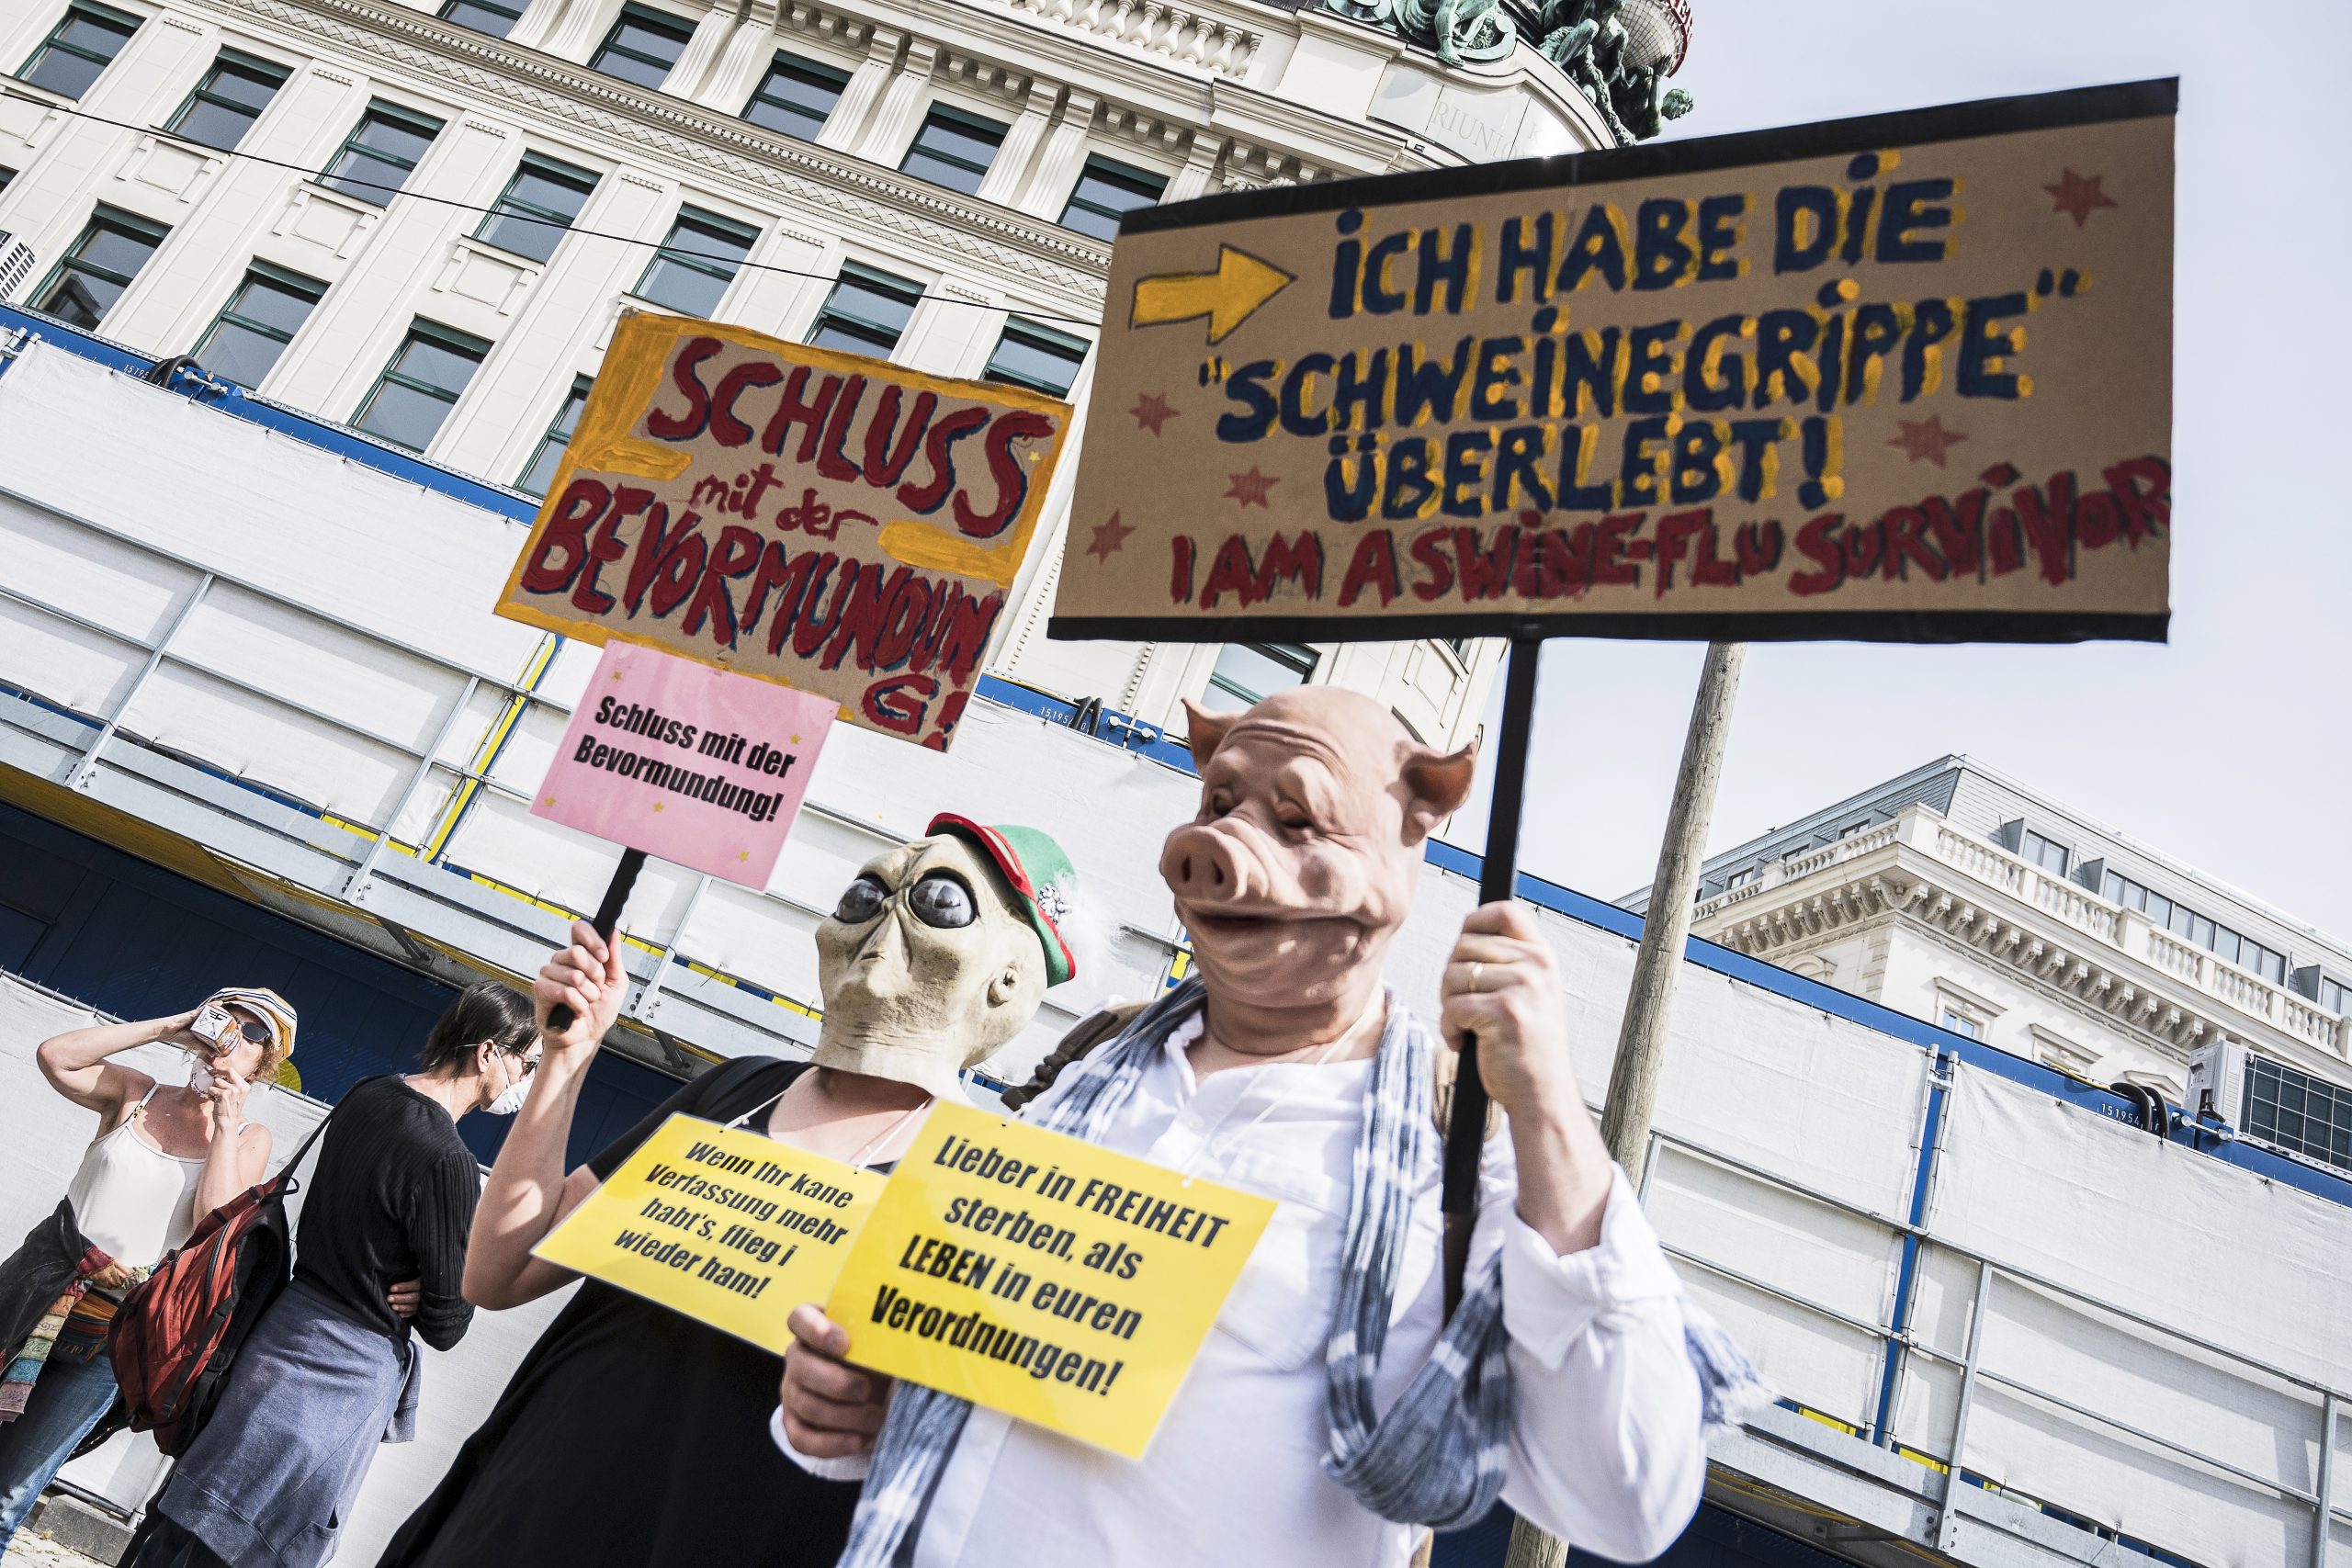 epa08382408 Participants hold signs during a demonstration against the measures of the Austrian government to slow down the ongoing pandemic of the COVID-19 disease caused by the SARS-CoV-2 coronavirus in Vienna, Austria, 24 April 2020.  EPA/CHRISTIAN BRUNA